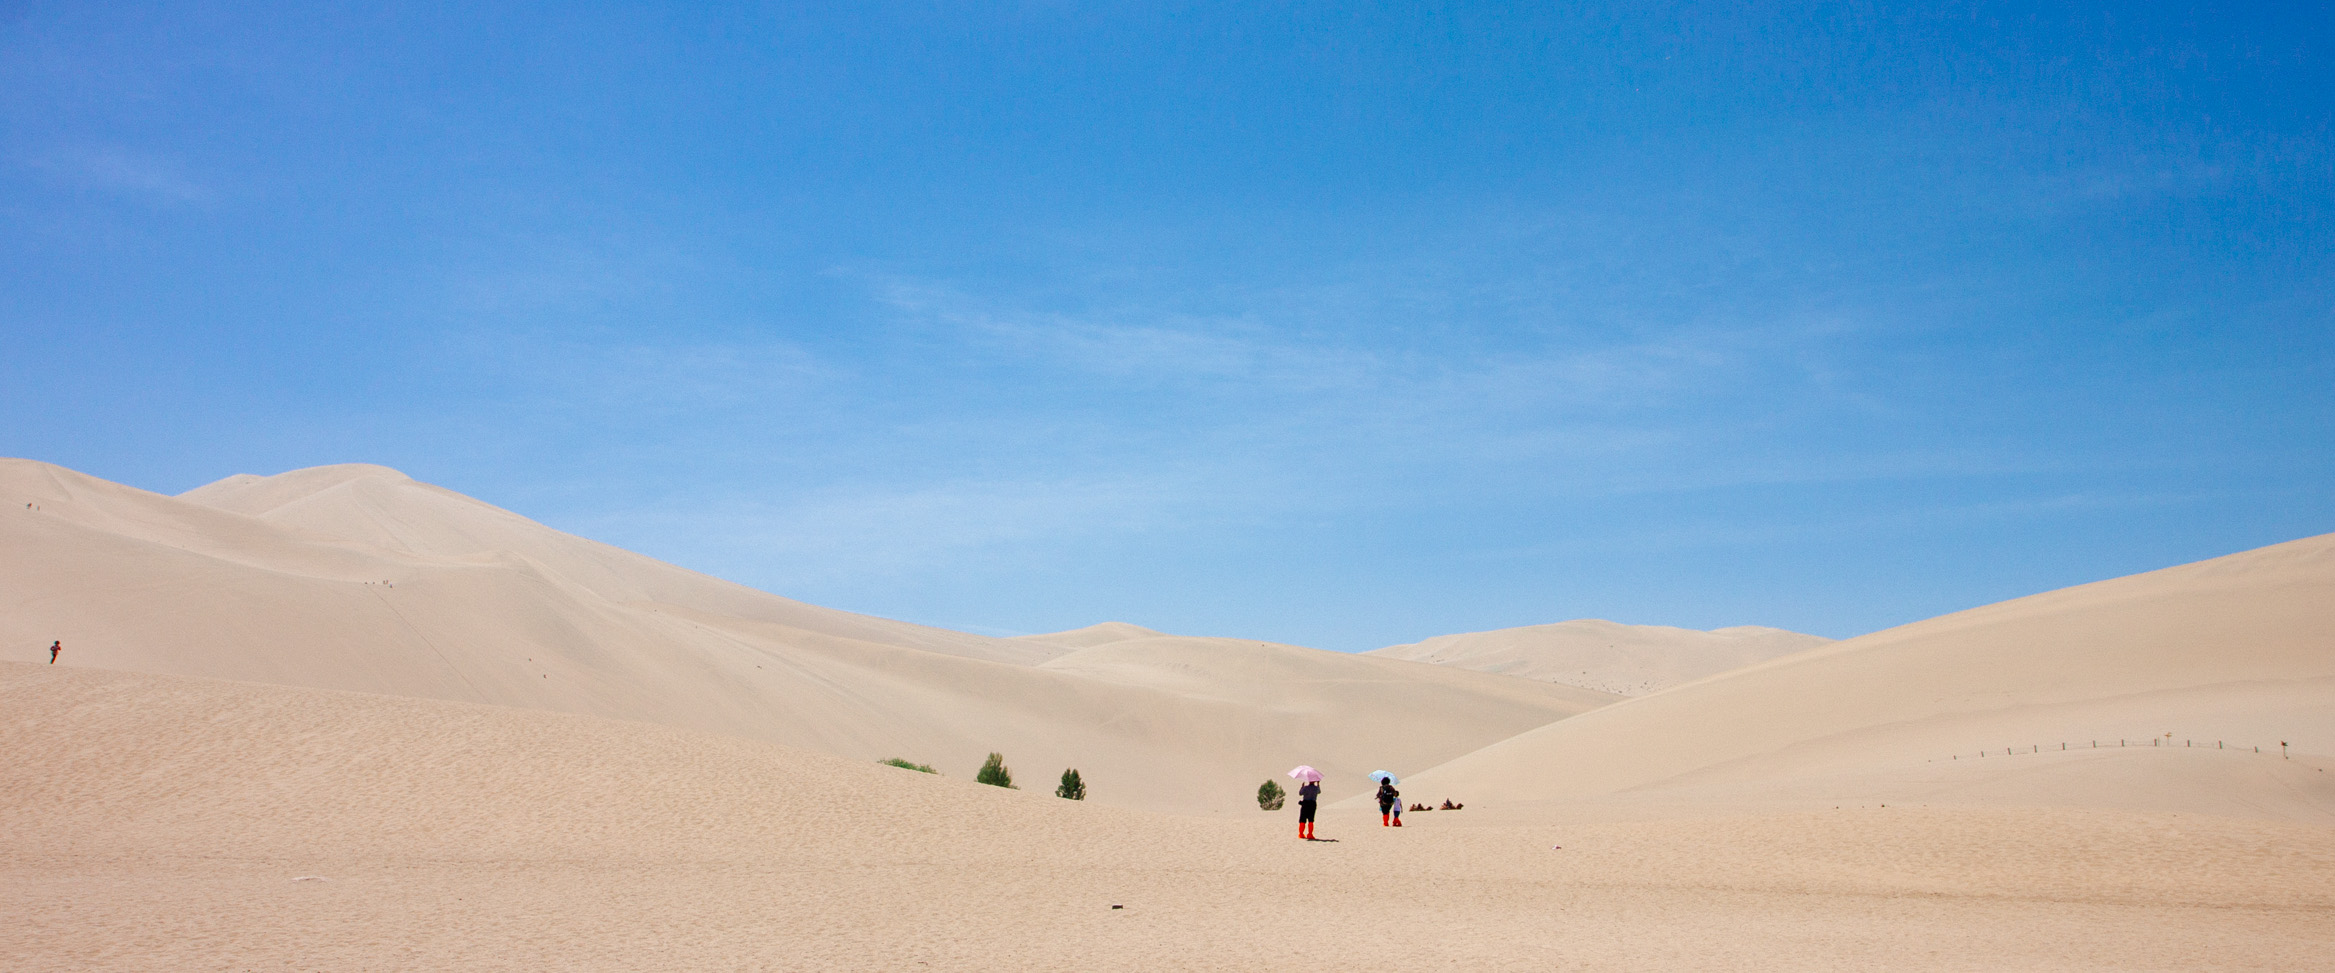 Chinese Tourists and a Barren Desert Scape